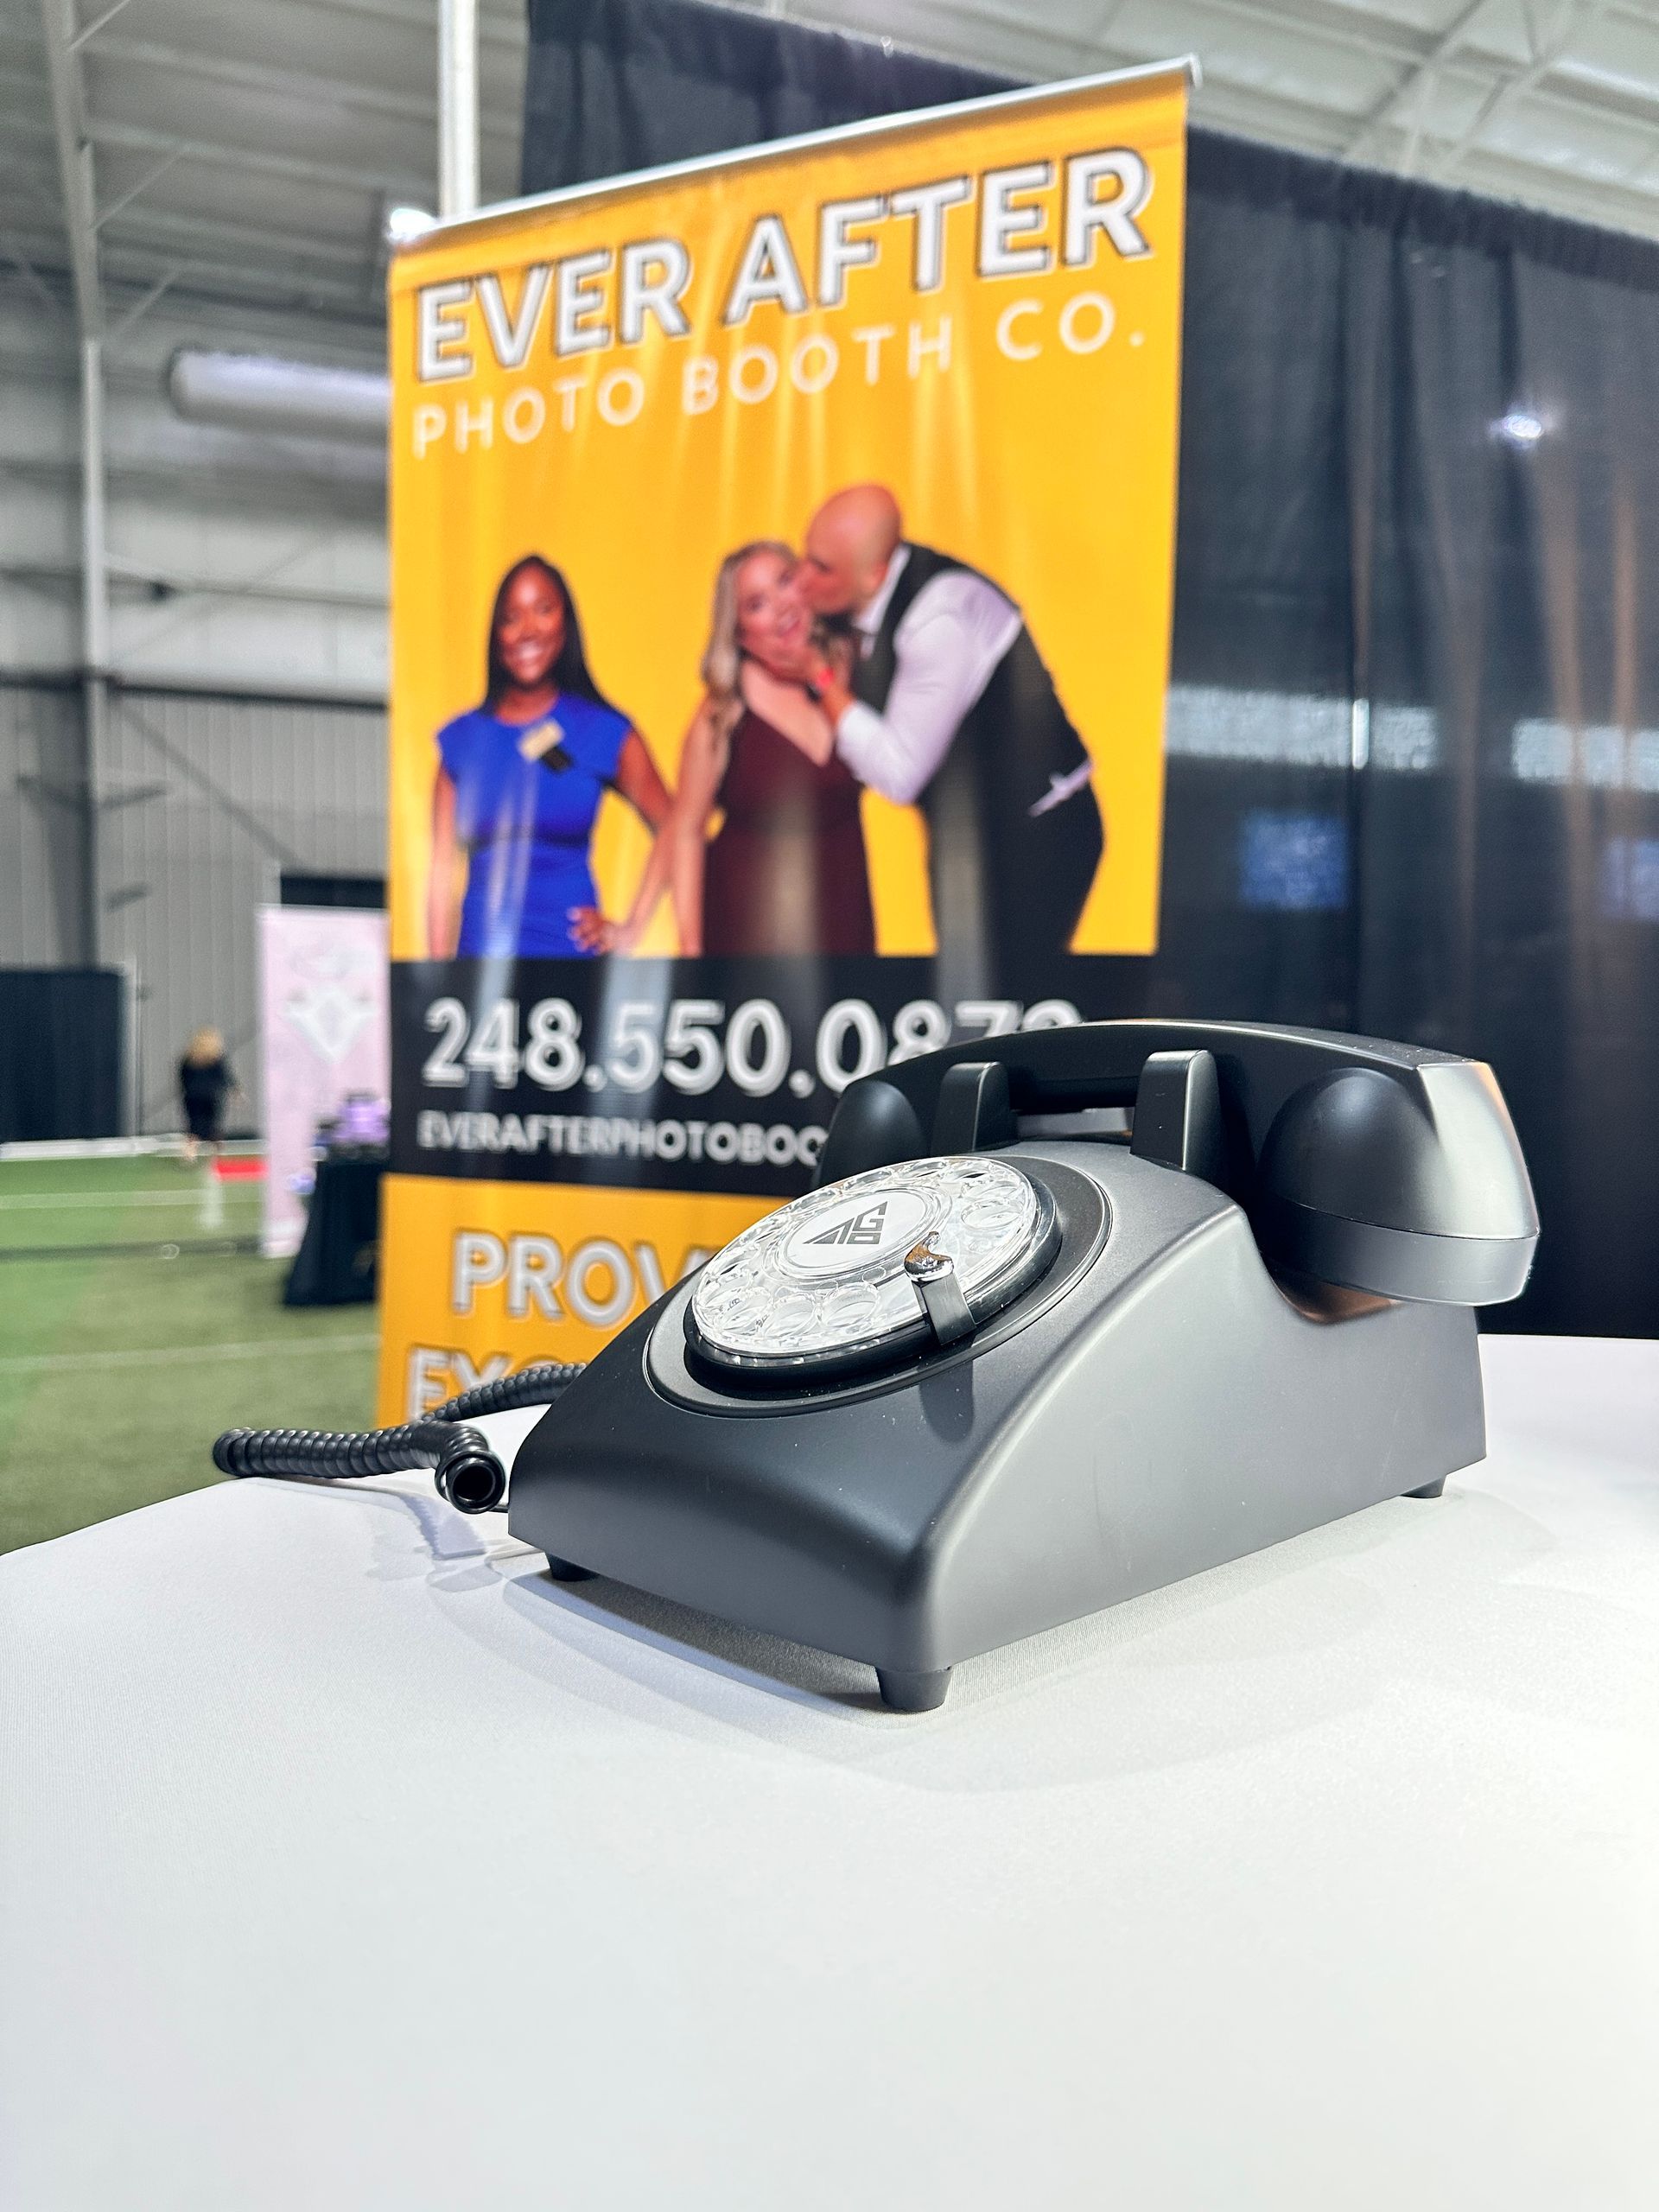 a phone is sitting on a table in front of a sign that says ever after photo booth co.